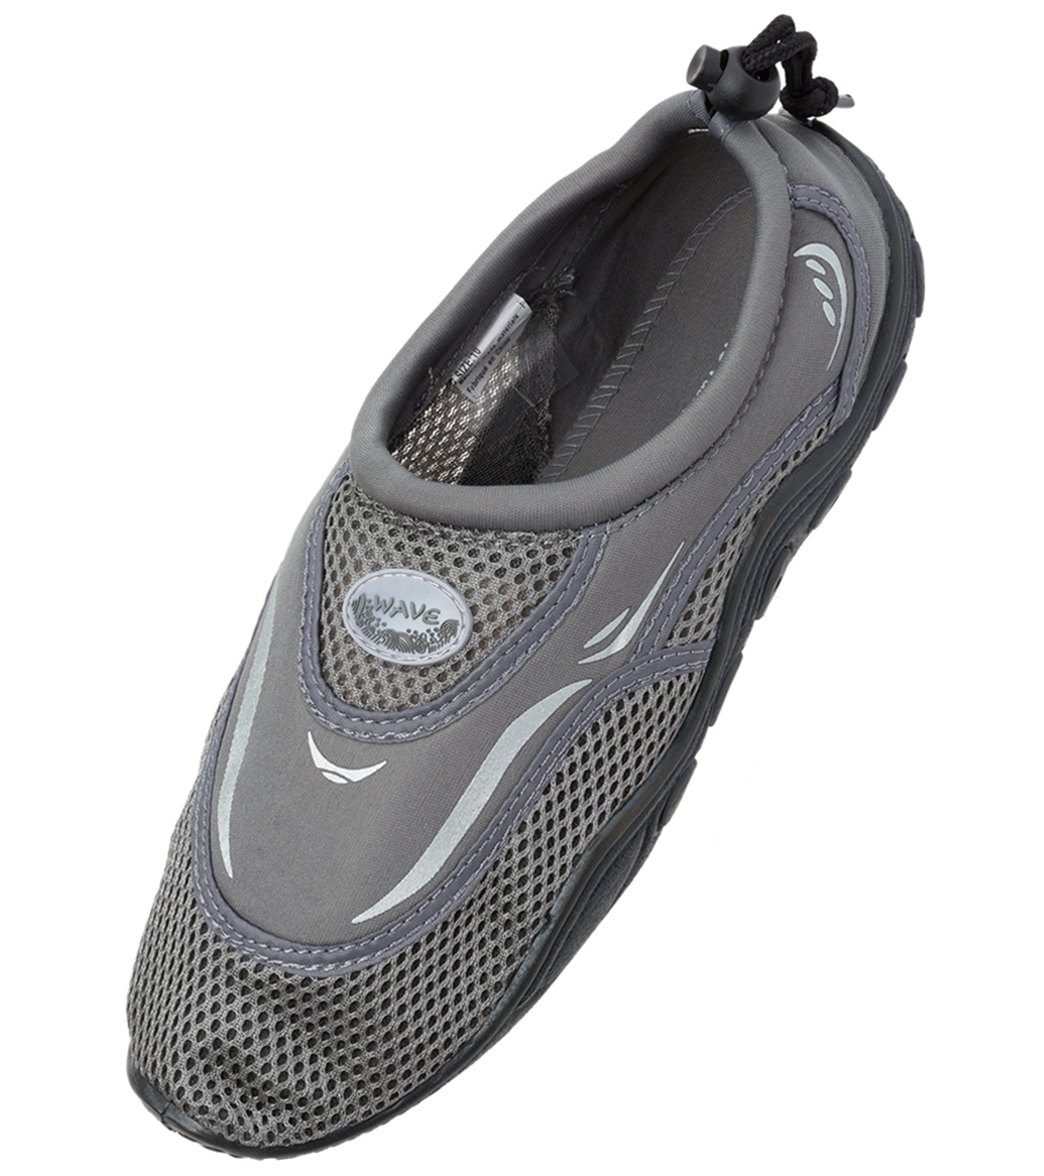 Easy Usa Men's Water Shoes - Grey 7 - Swimoutlet.com